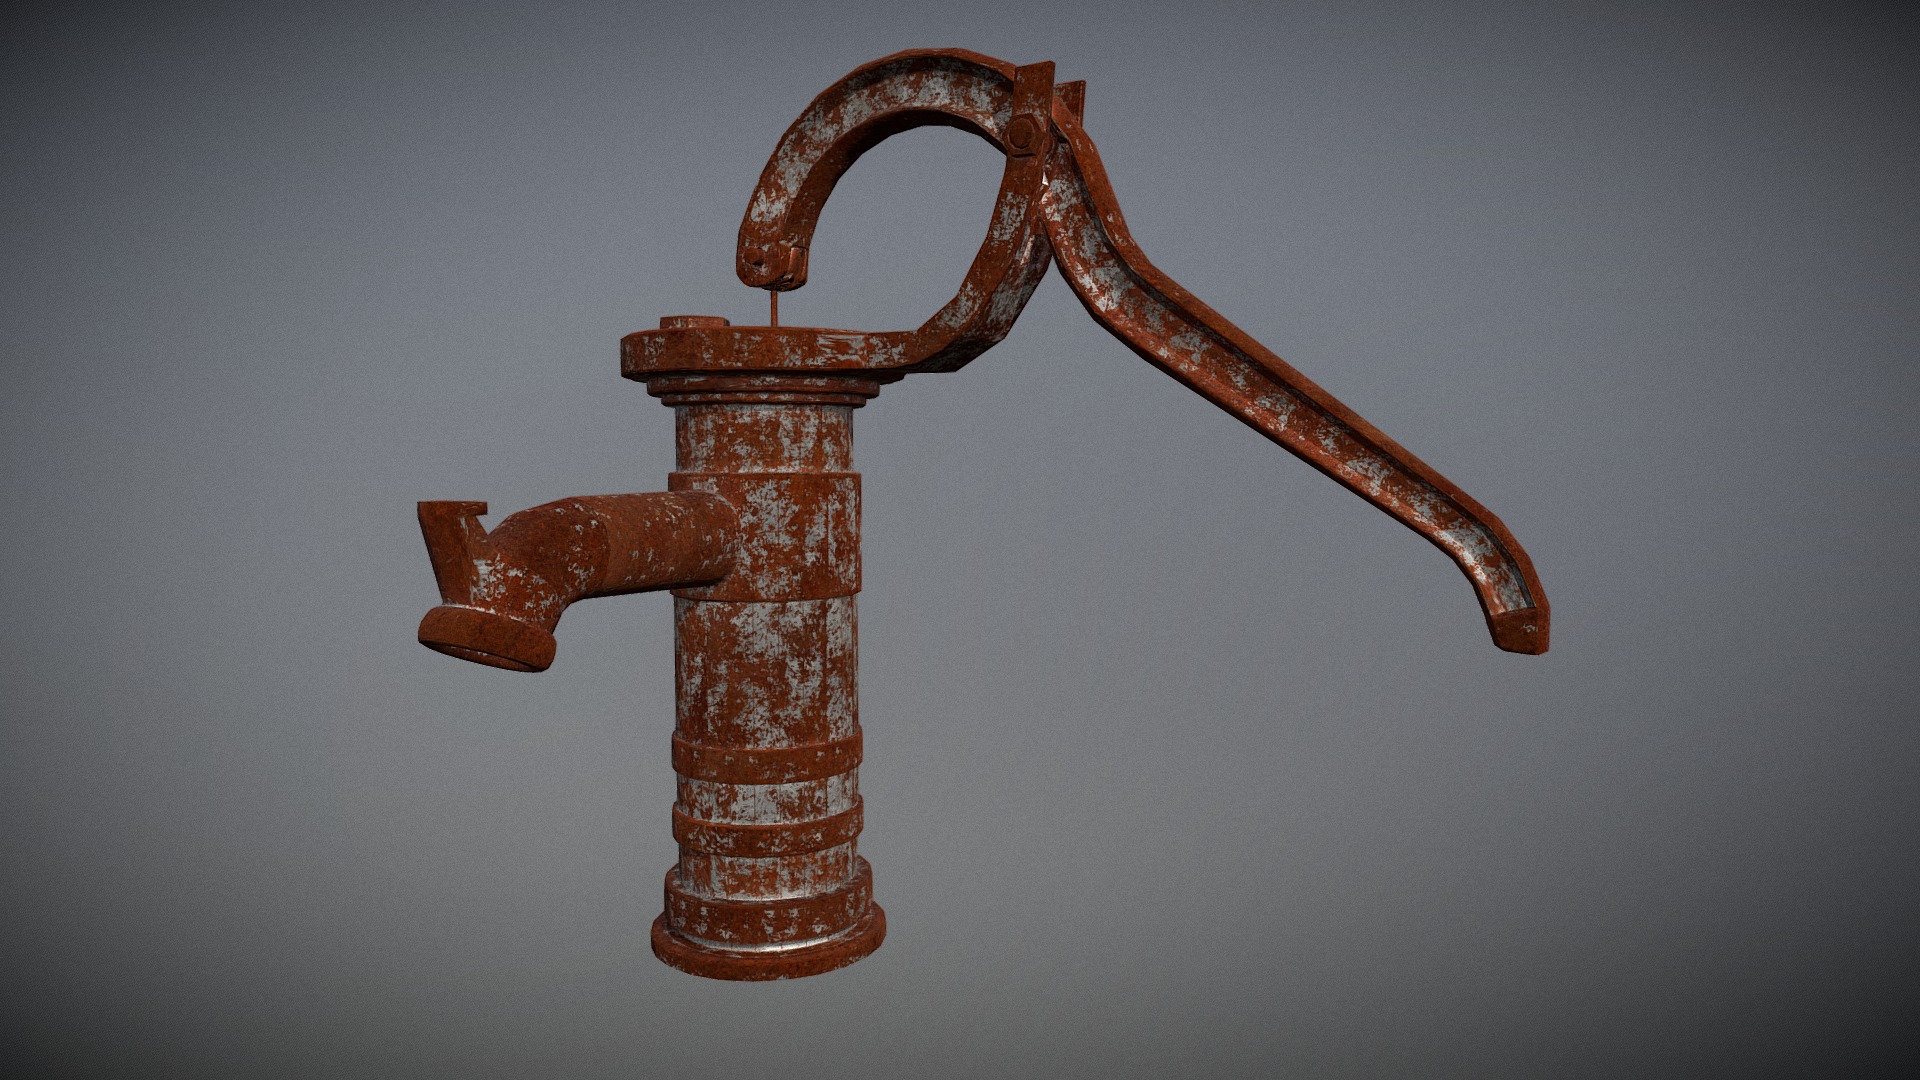 3D model Rusted Waterpump - This is a 3D model of the Rusted Waterpump. The 3D model is about a wooden cross with a handle.